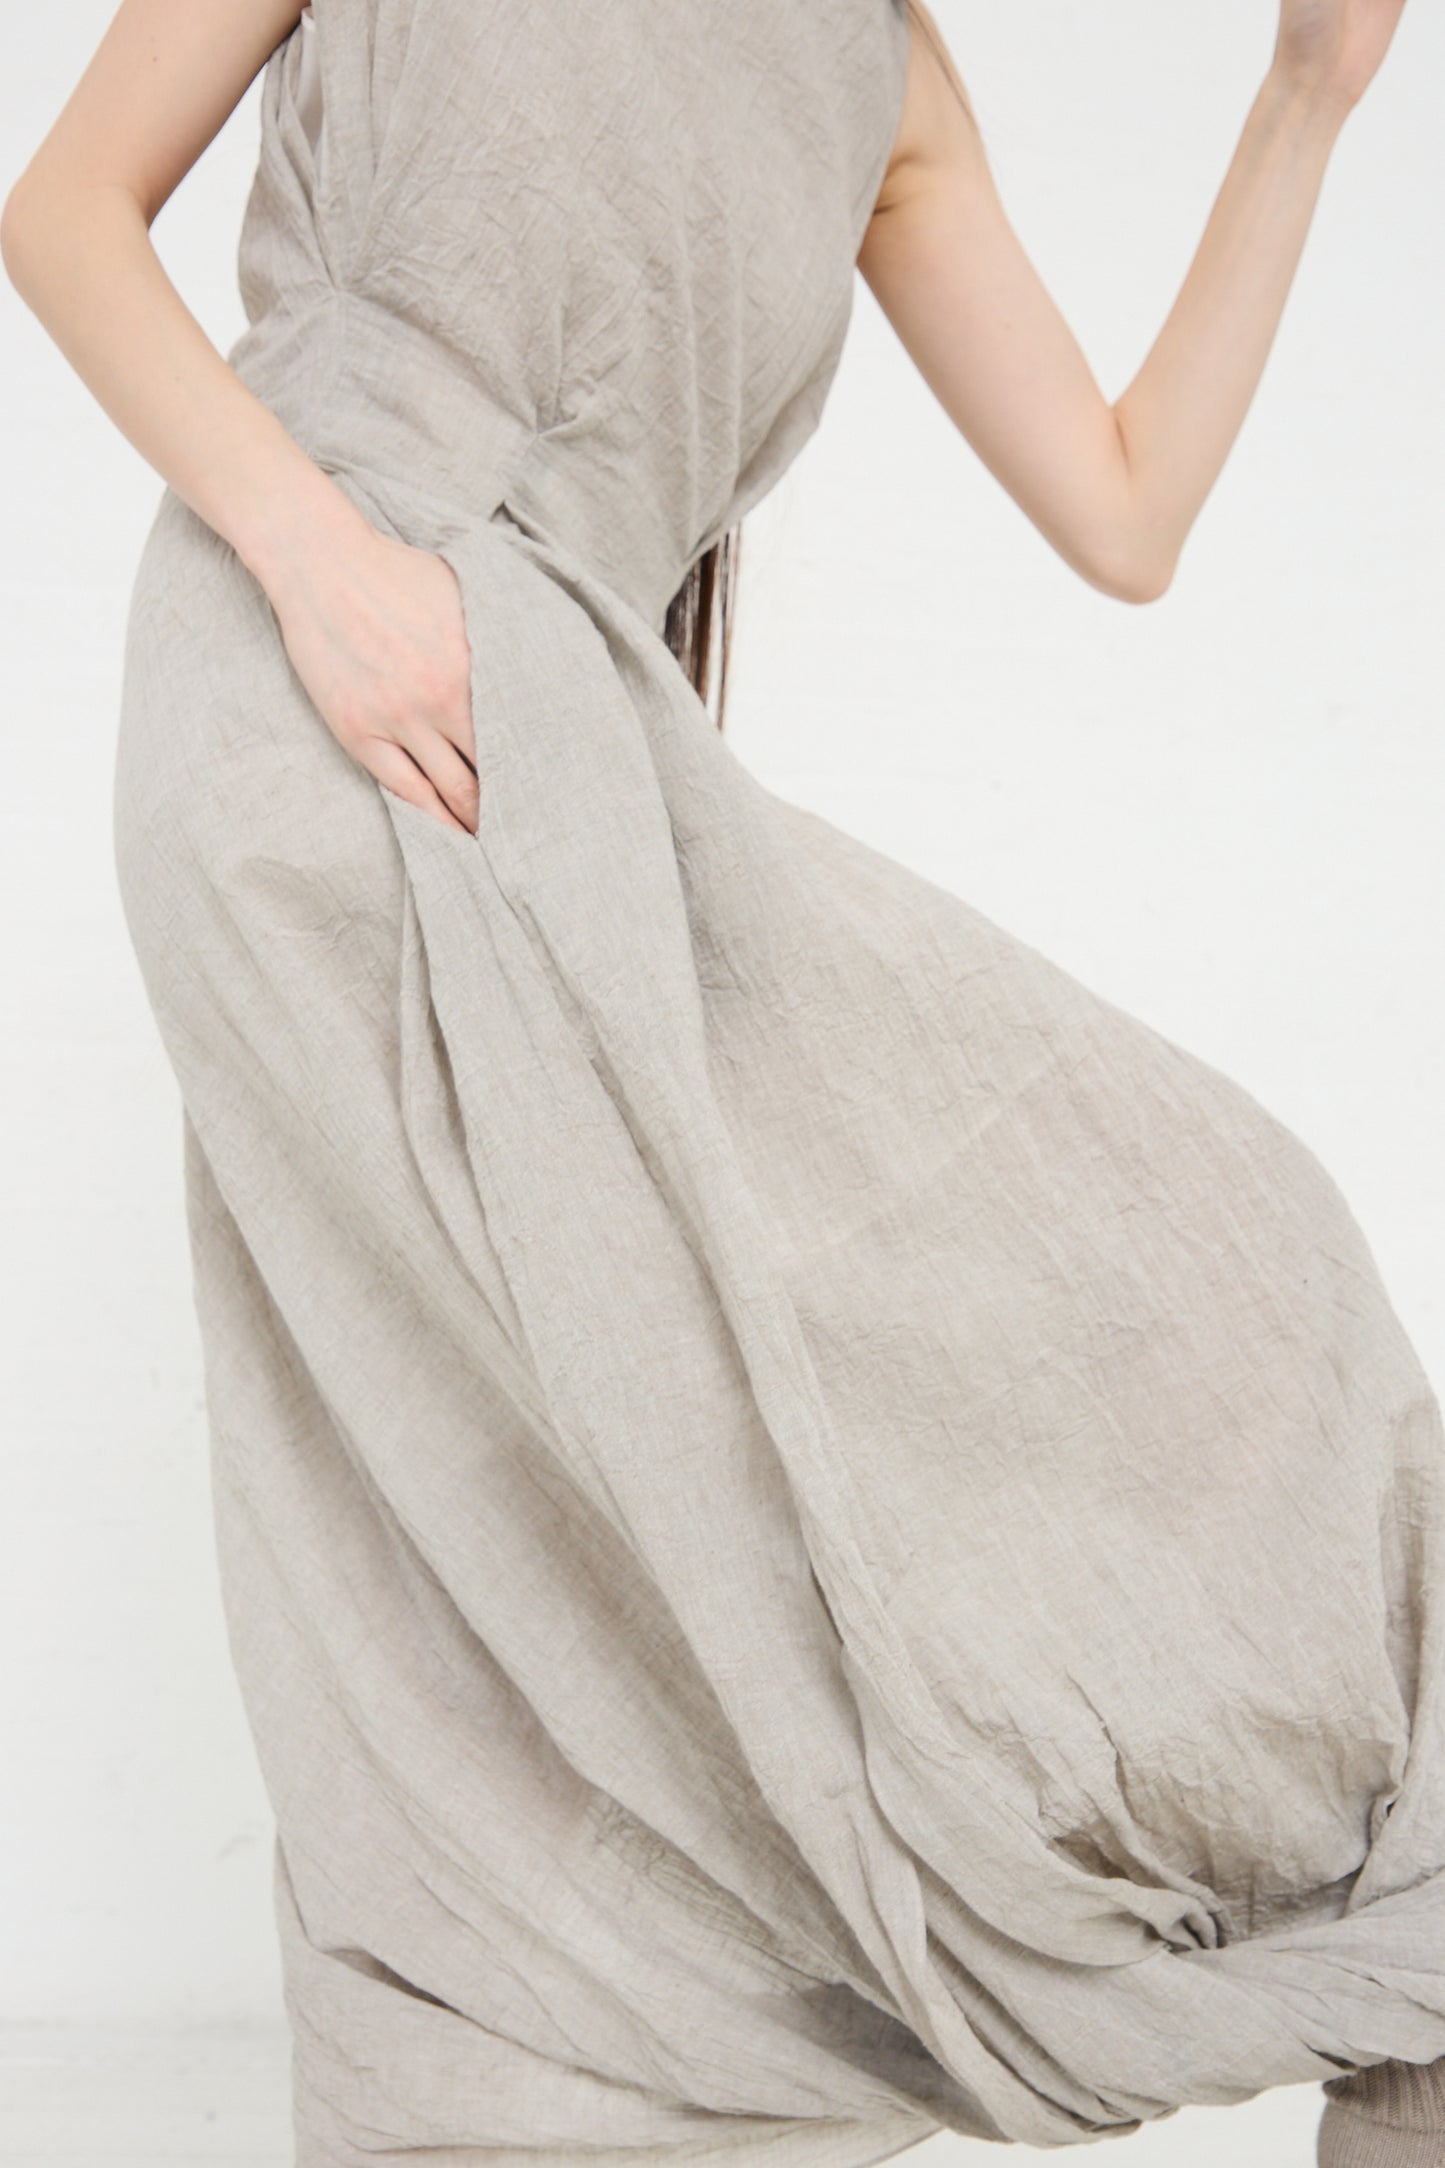 A woman in a beige cotton/linen blend Gauze Twist Dress in Ash by Lauren Manoogian holding the fabric to her side, partial view focusing on the dress and her torso.